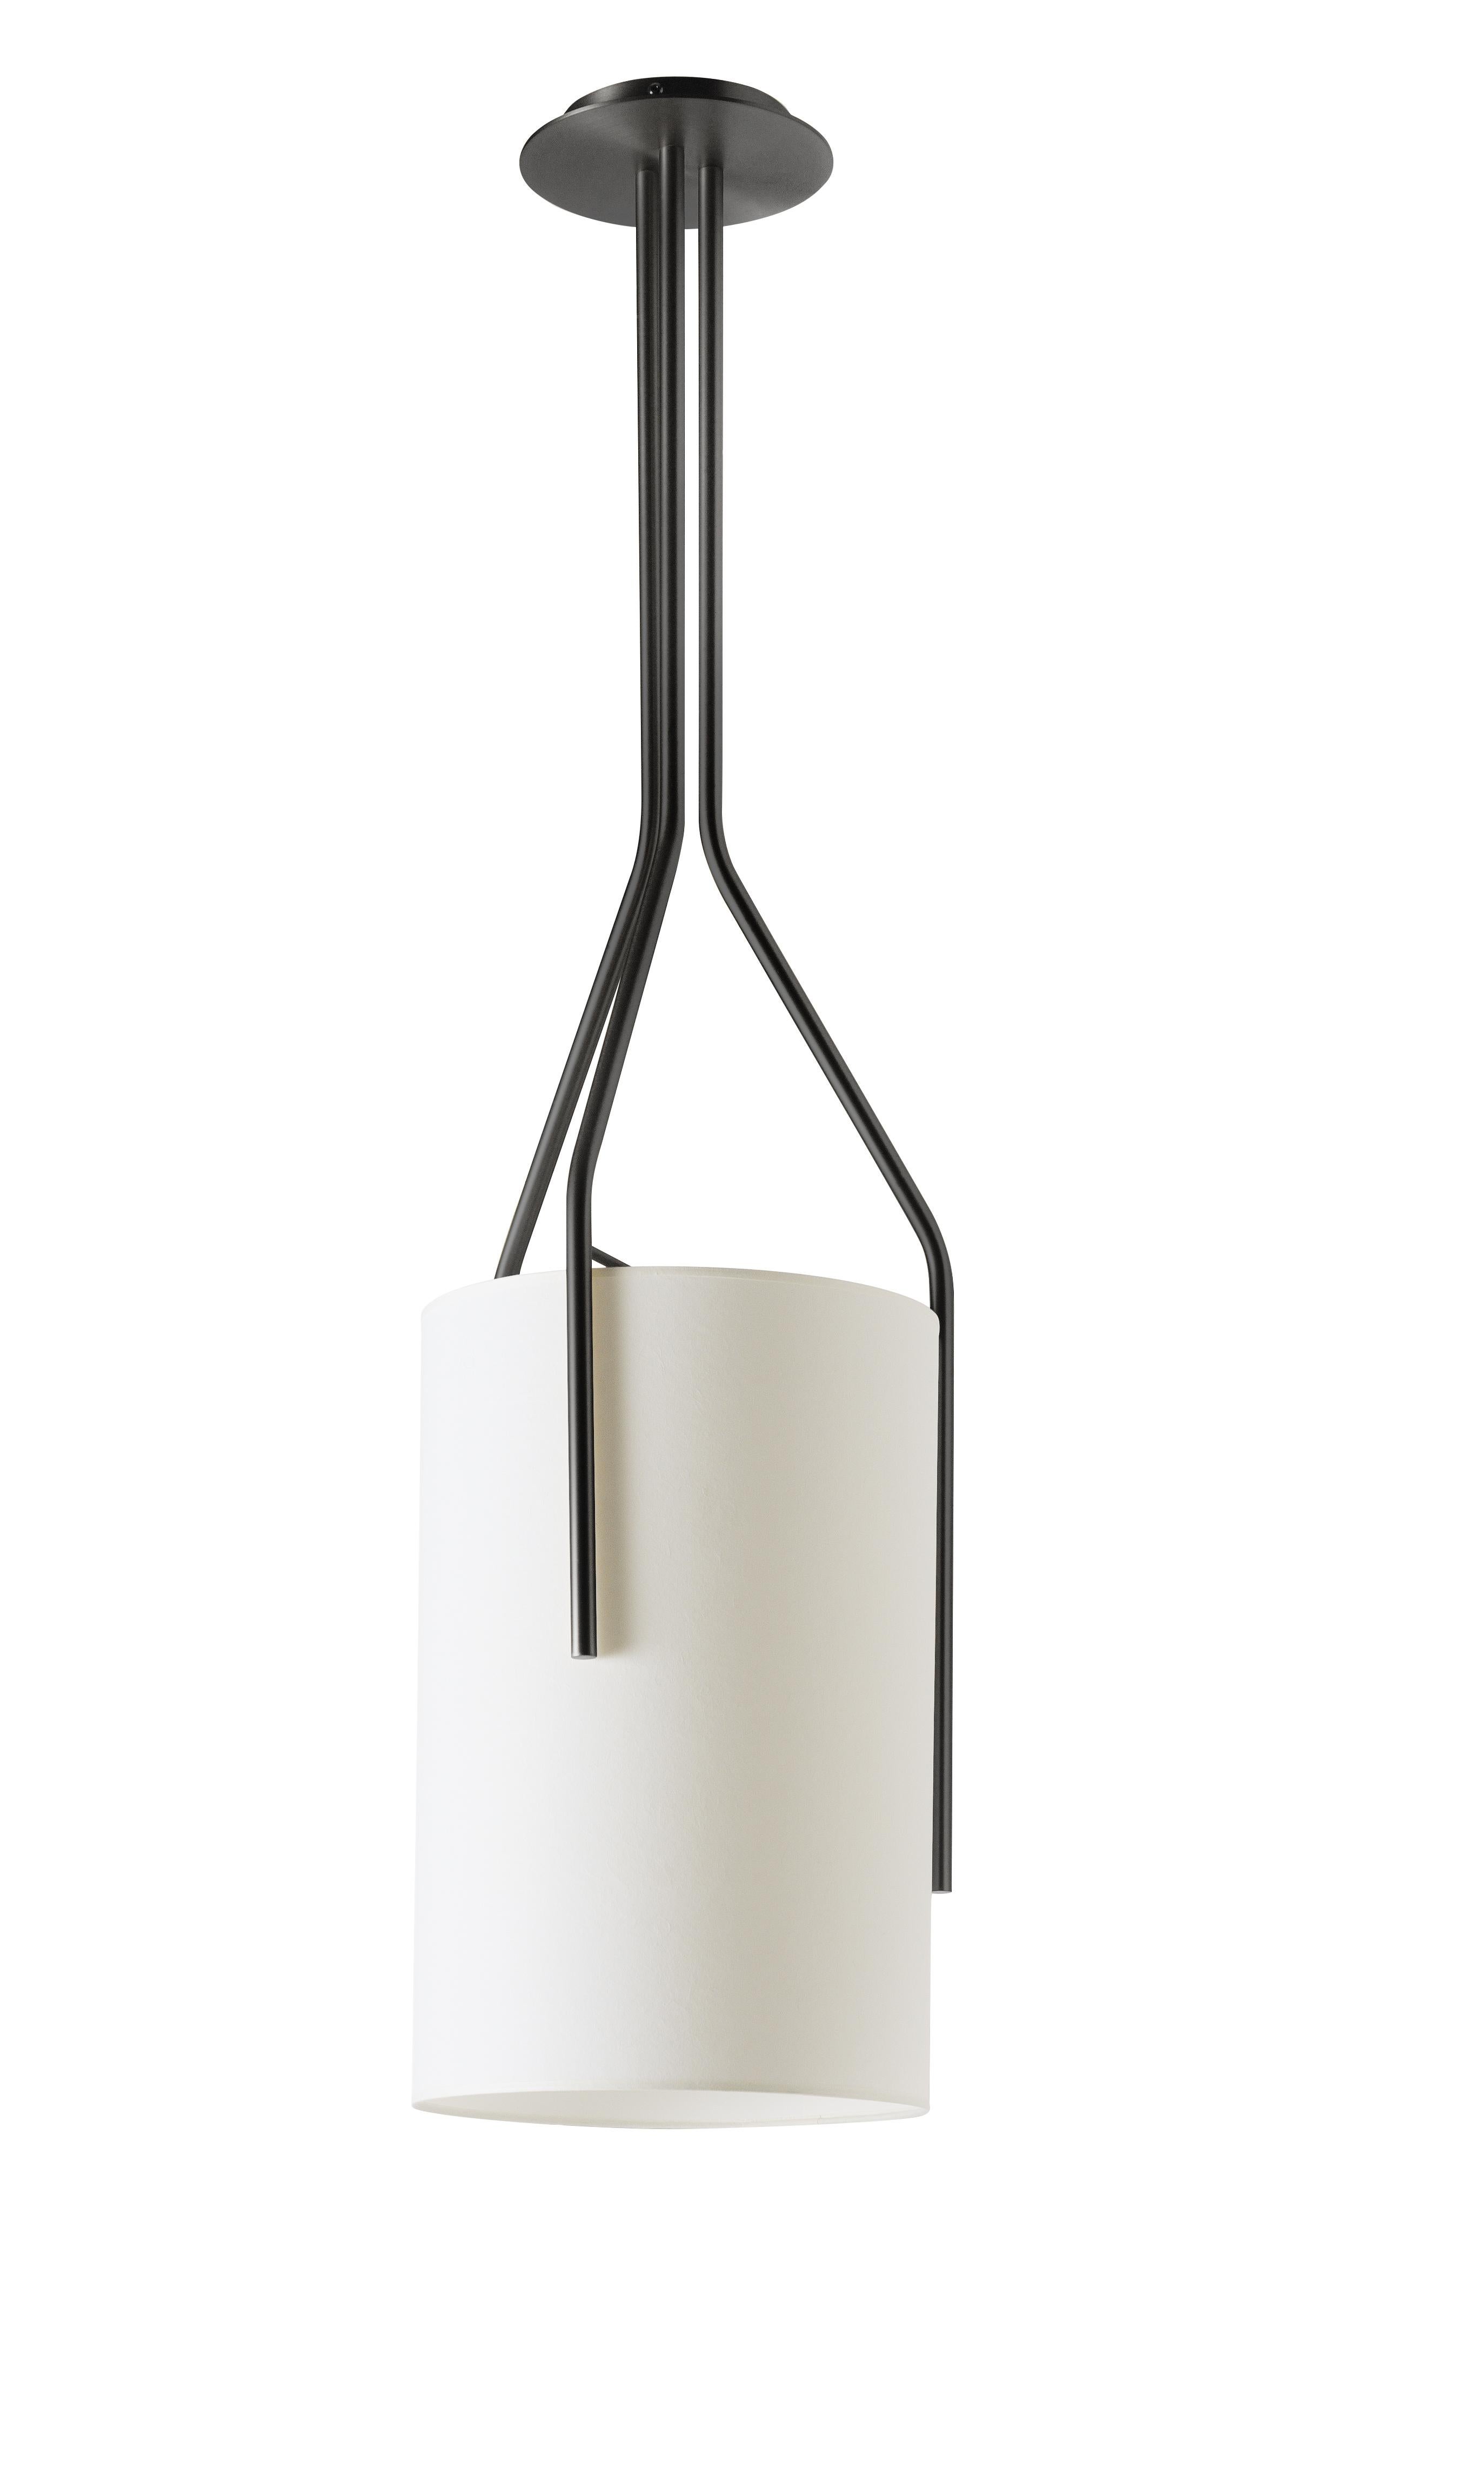 Arborescence XS satin graphite pendant by Hervé Langlais
Dimensions: D 33 X H 125 cm
Materials: solid brass, Lampshade Drop Paper® M1, black textile cable (2m).
Others finishes and dimensions are available. 
All our lamps can be wired according